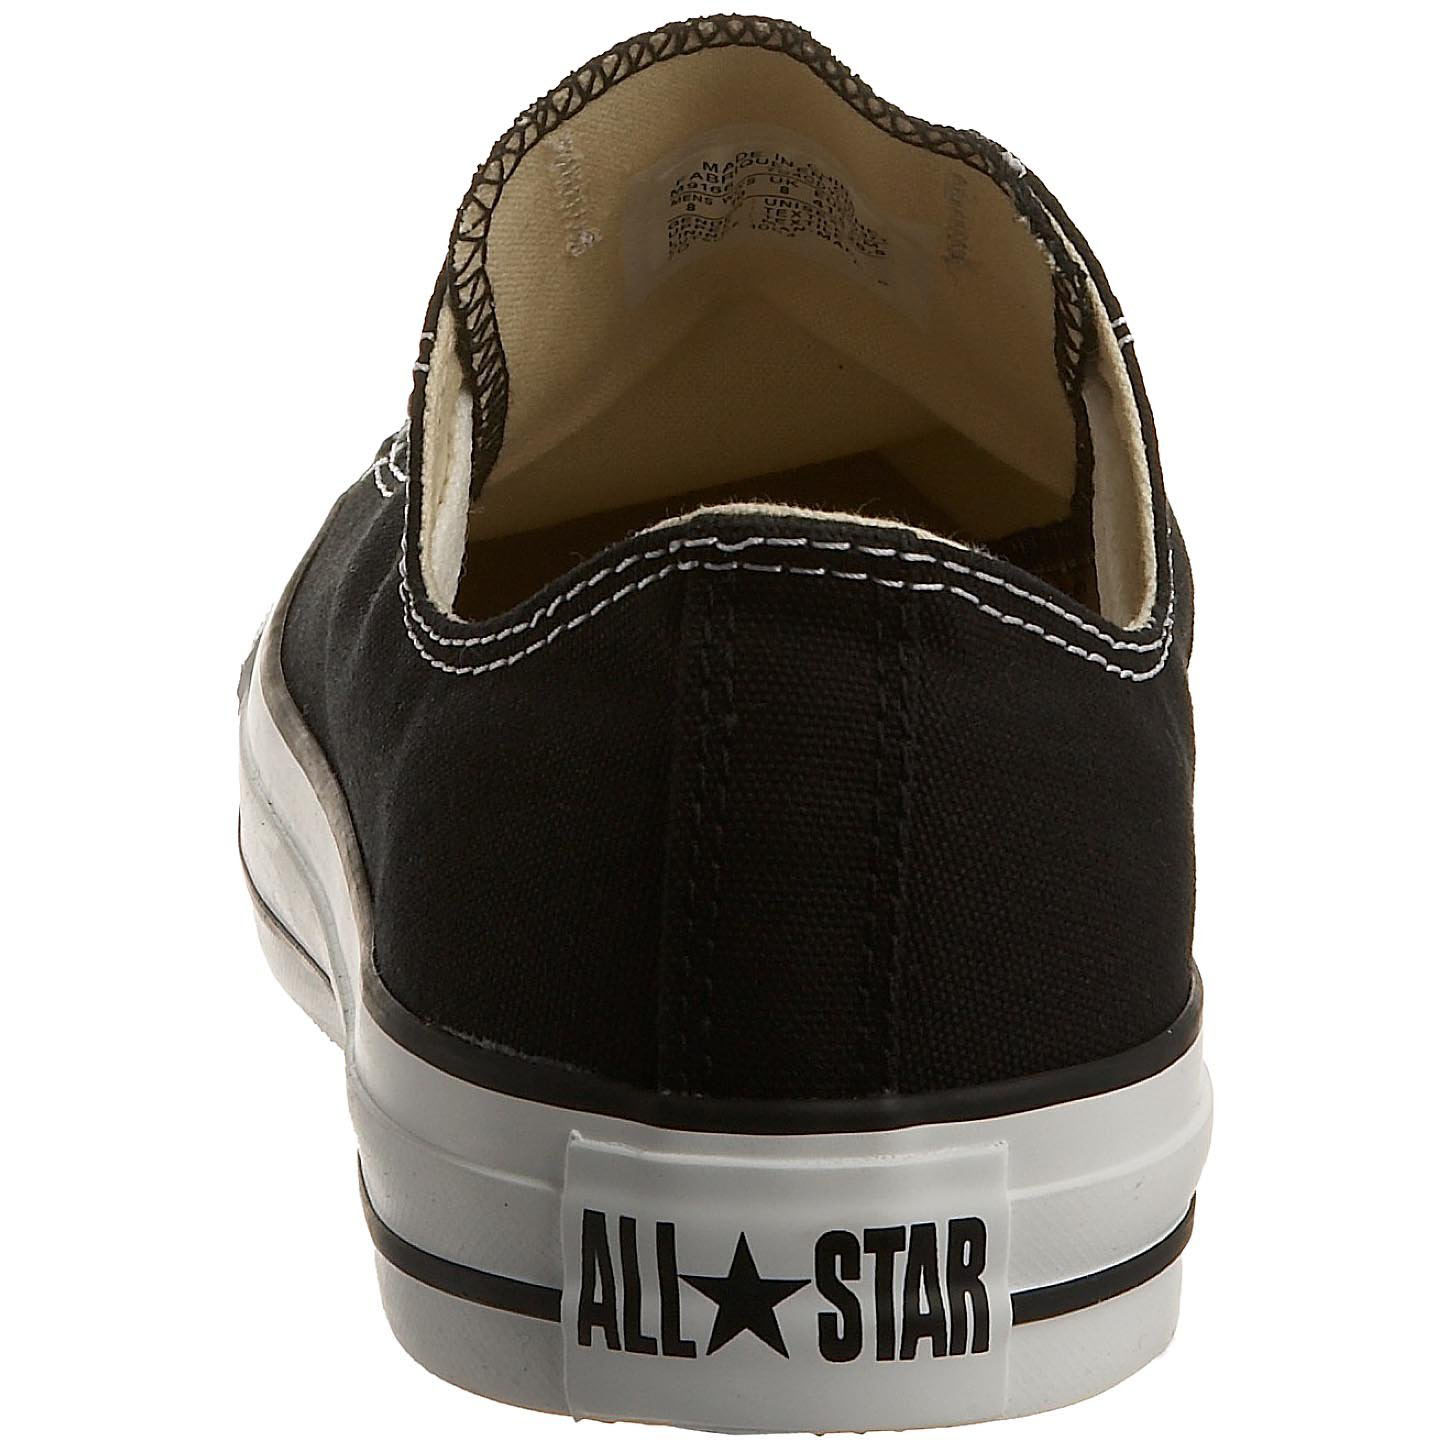 Converse Kids's CONVERSE CHUCK TAYLOR ALL STAR YTHS OXFORD BASKETBALL SHOES - image 3 of 7